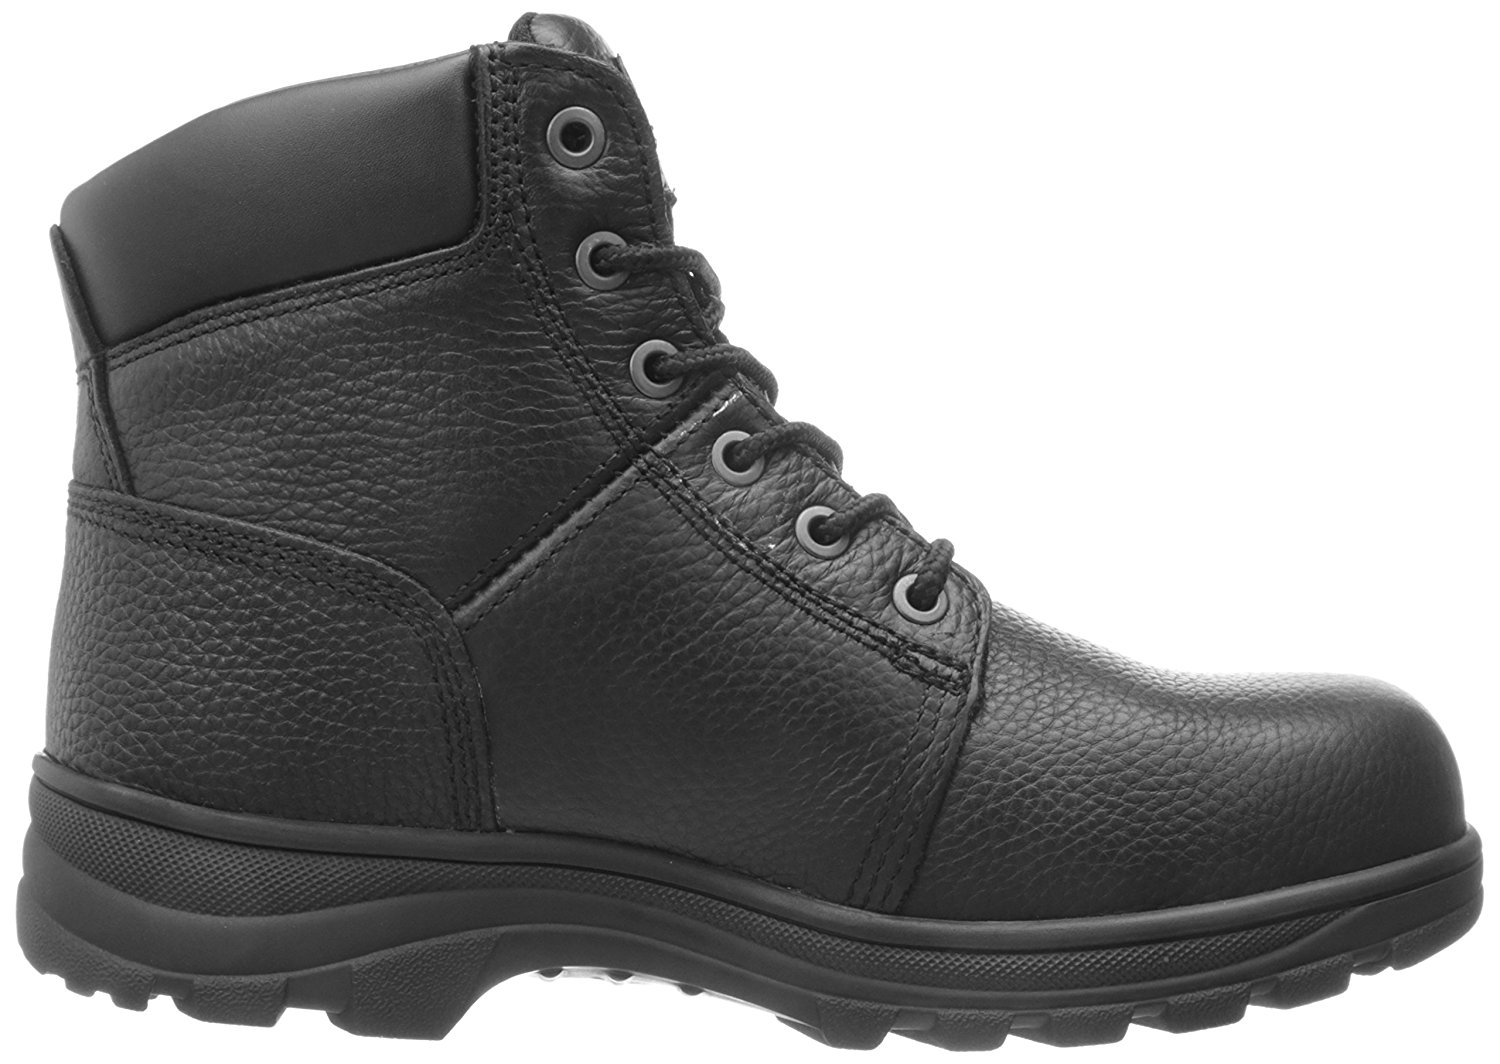 Skechers Mens 77009 Leather Steel toe Lace Up Safety Shoes, Black, Size ...